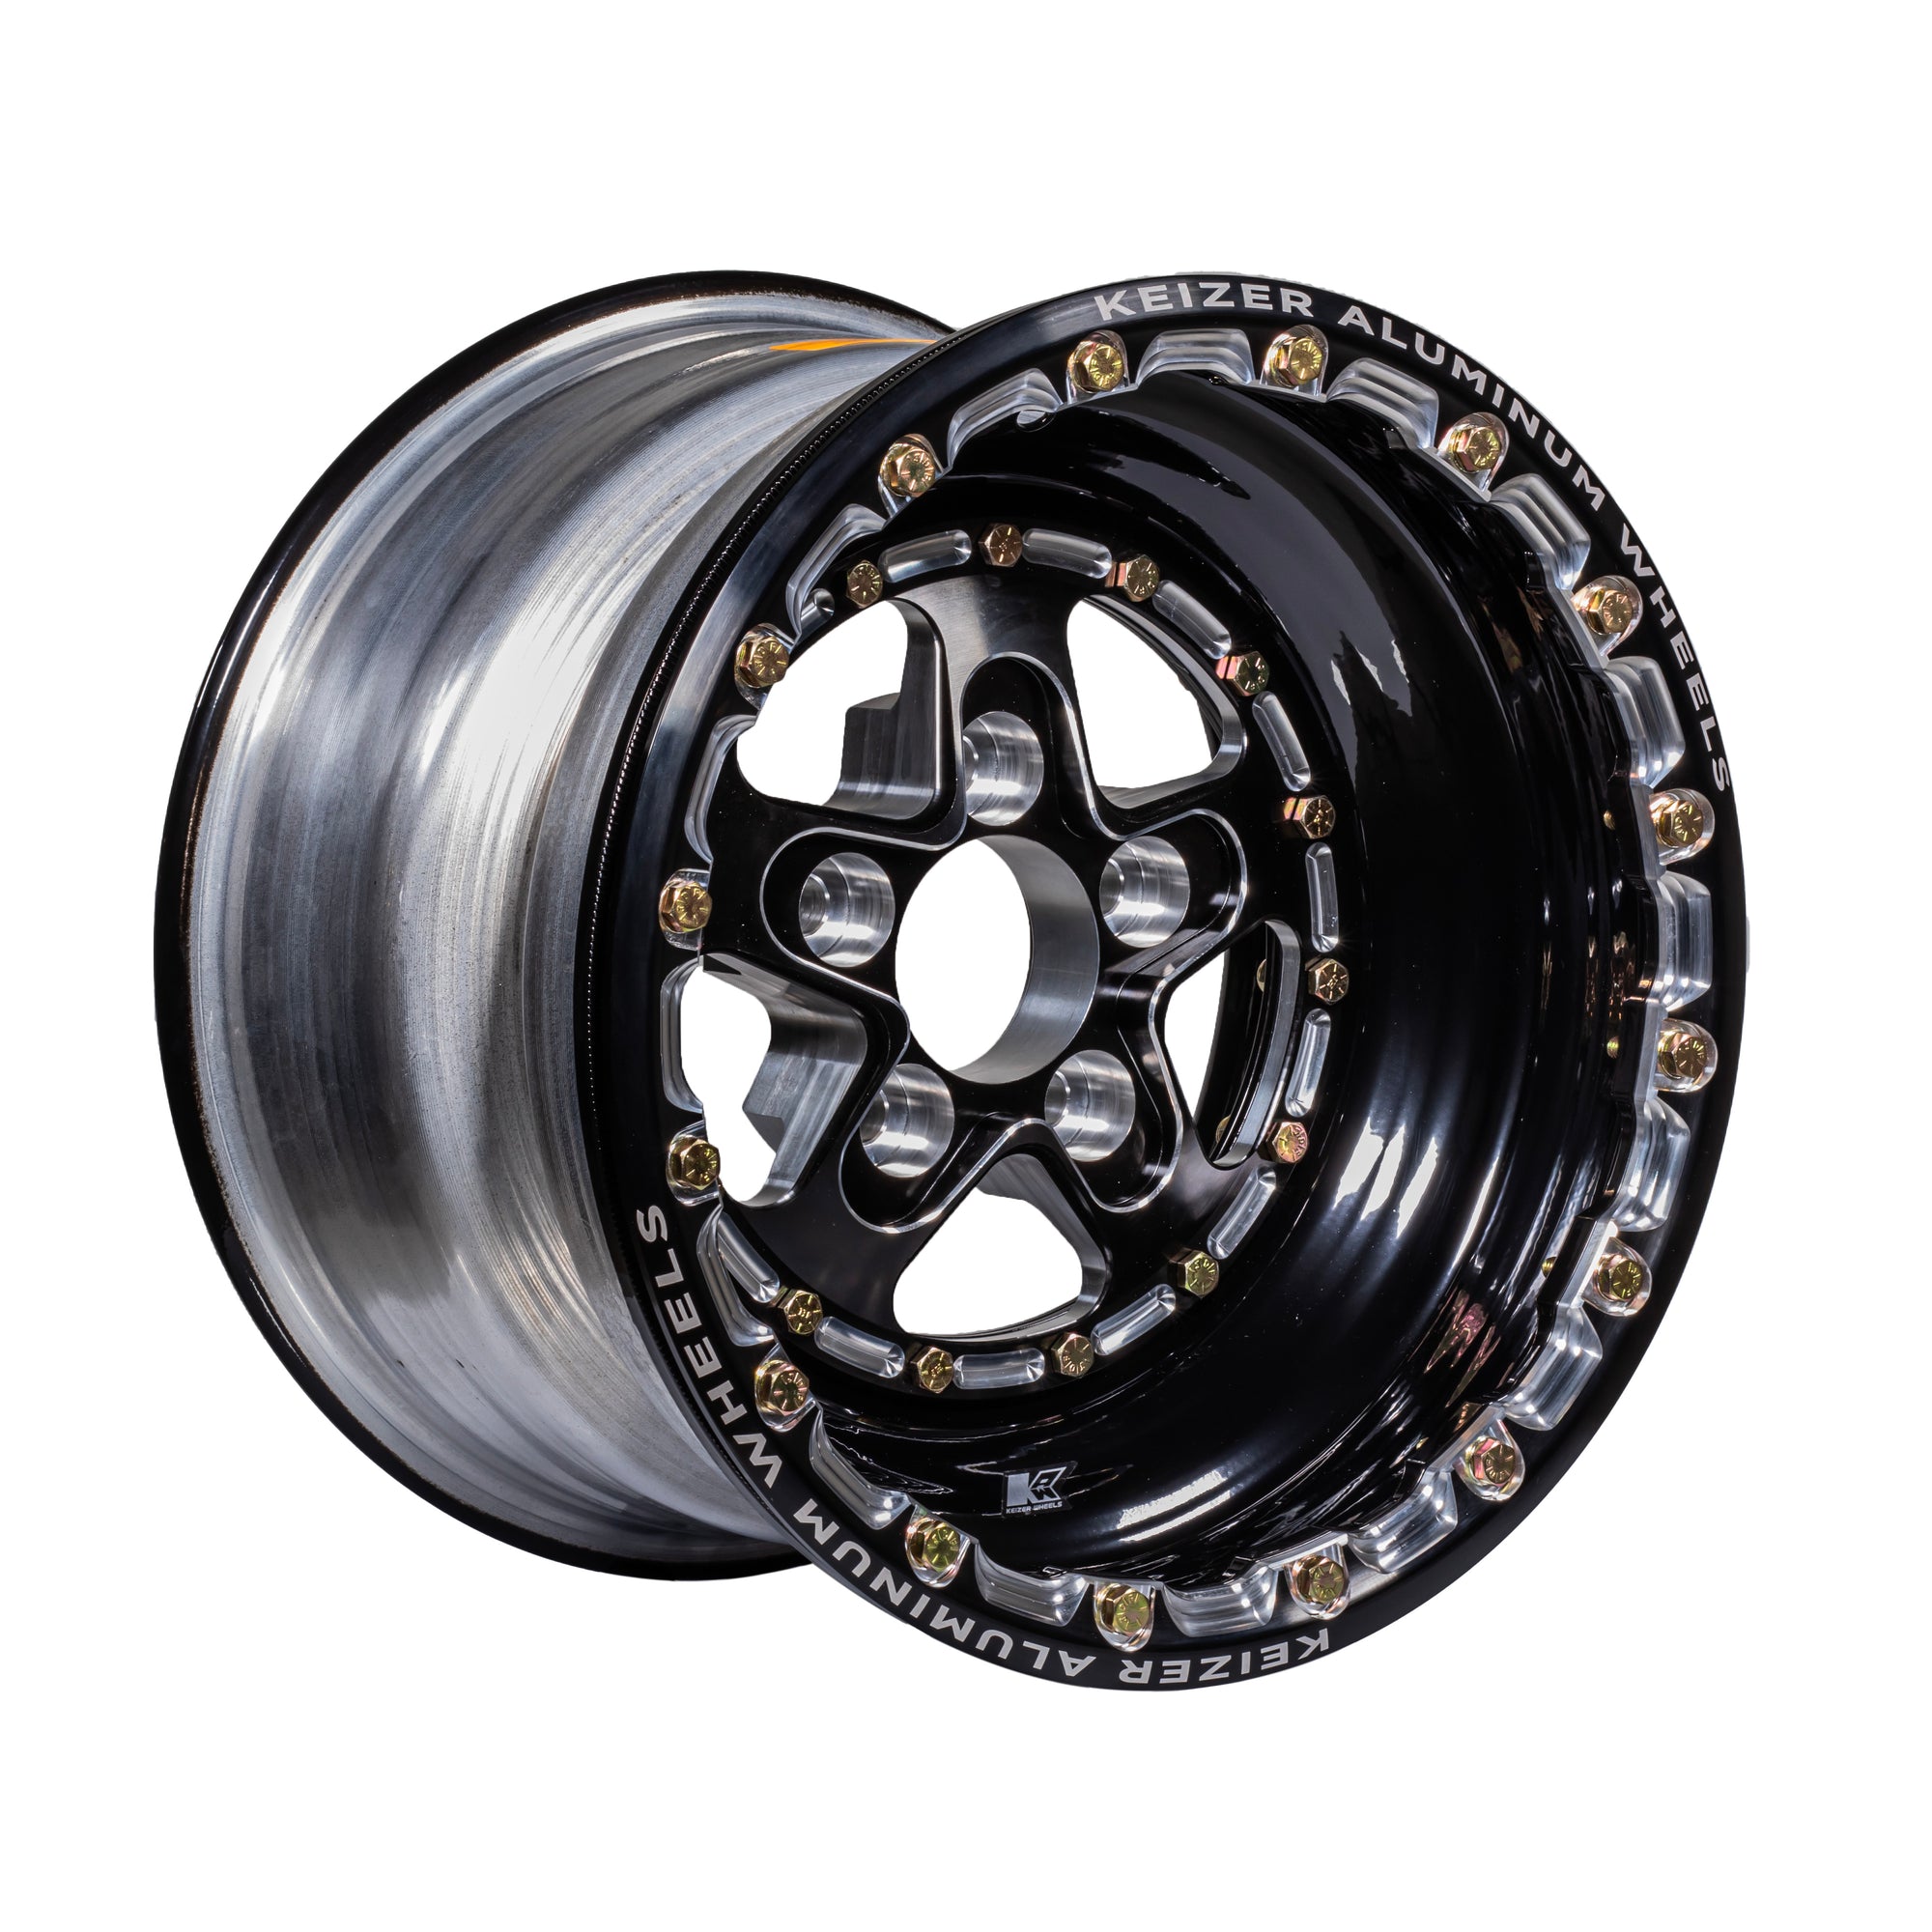 KEIZER FULL HOUSE FORGED WHEEL (REAR) - Synergy Raceparts